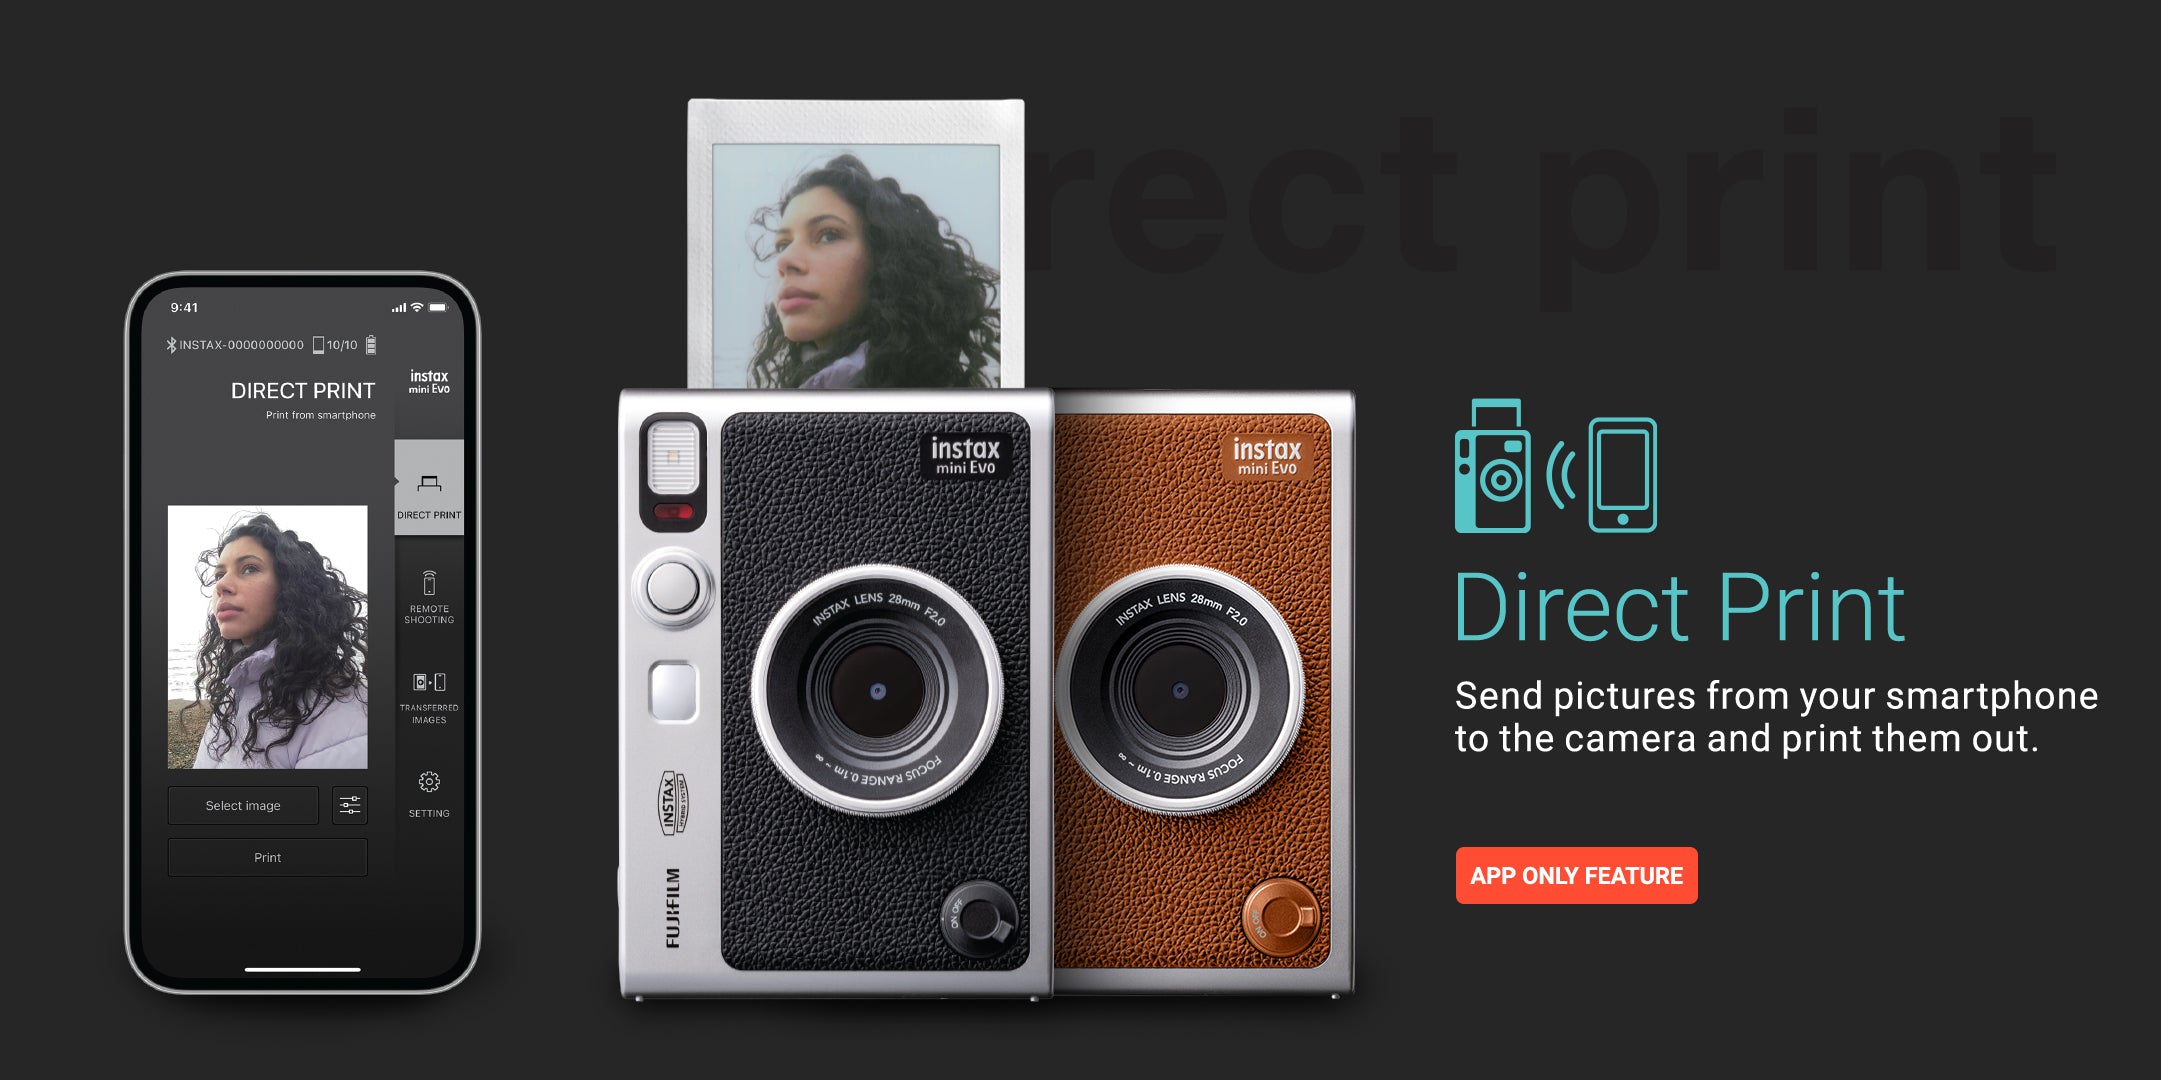 Instax mini evo with Direct Print Feature